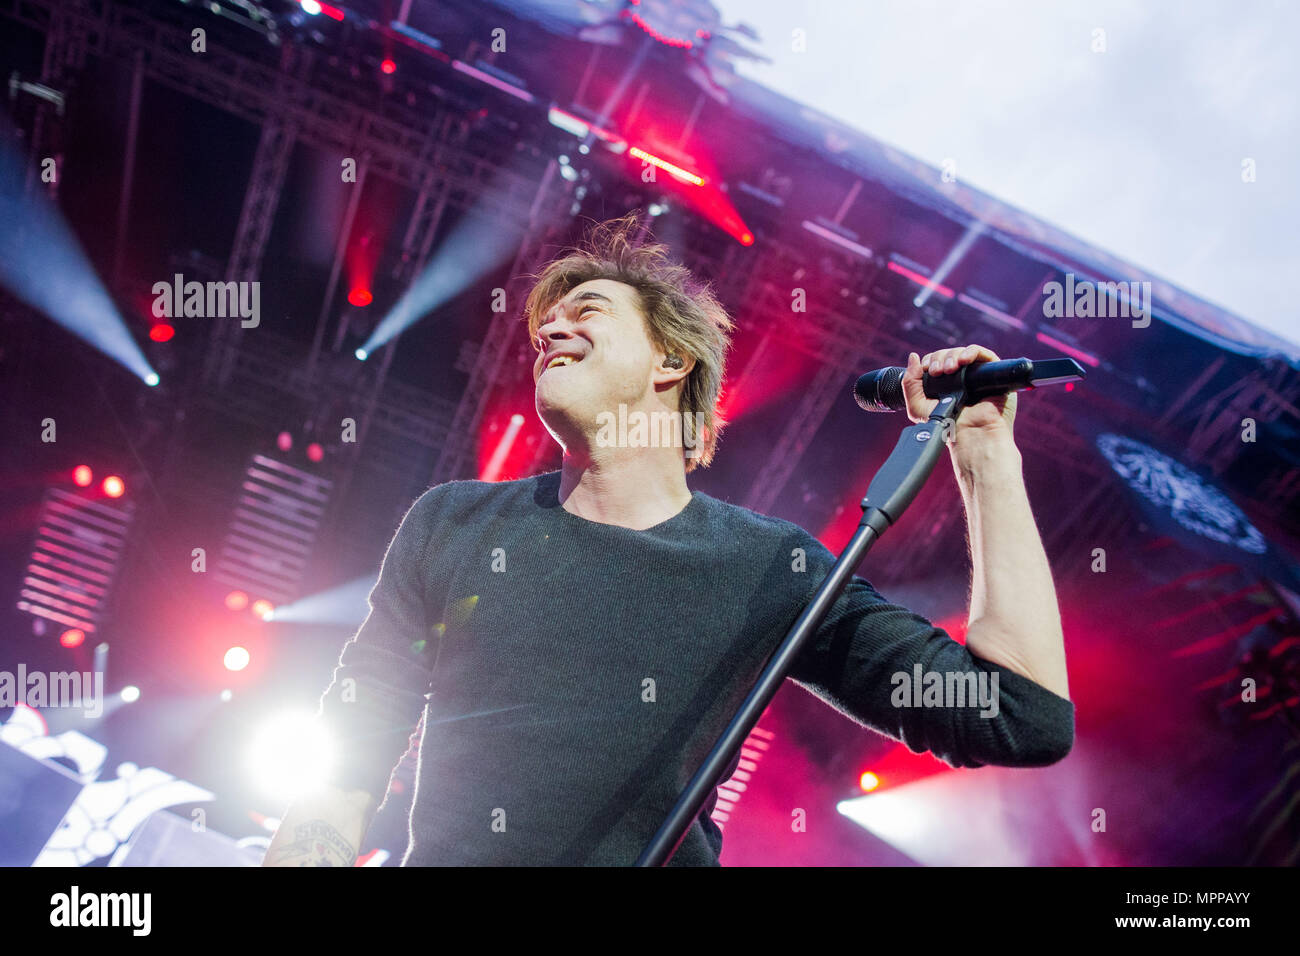 24 May 2018, Germany, Essen: Campino, singer with the band "Die Toten Hosen",  performing on stage. The concert is the first of the "Laune der Natour" tour,  which is set to run